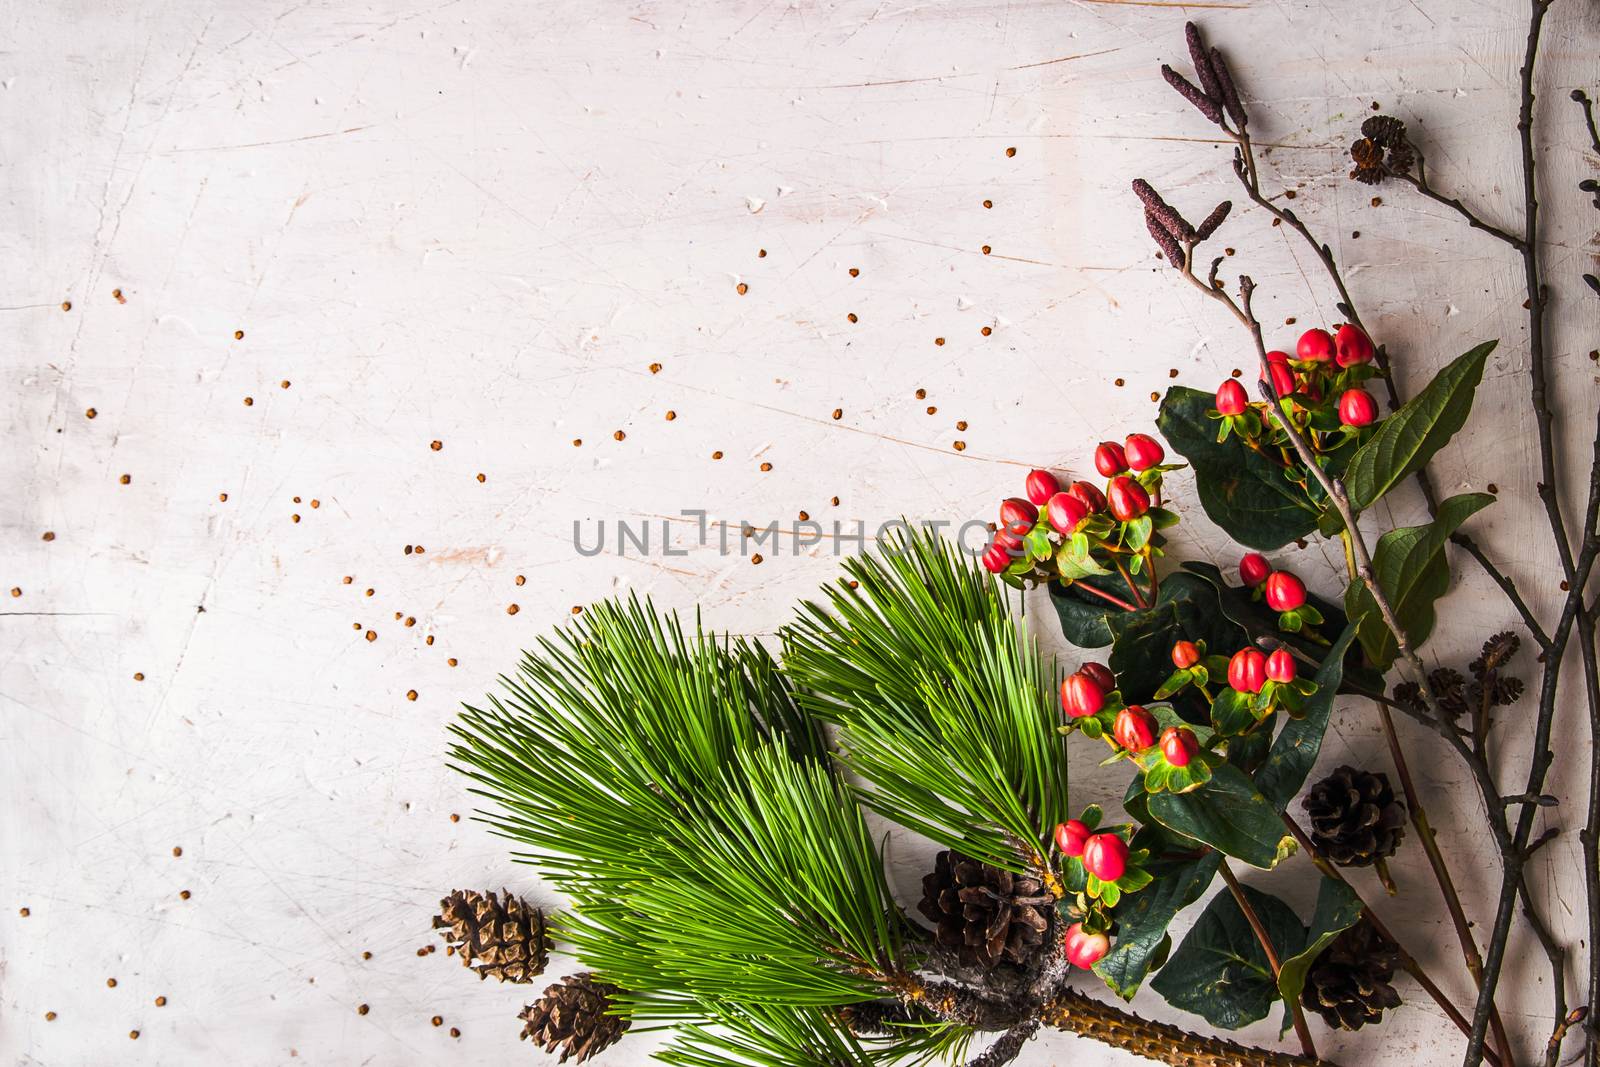 Pine branch and winter plants on the white table background horizontal